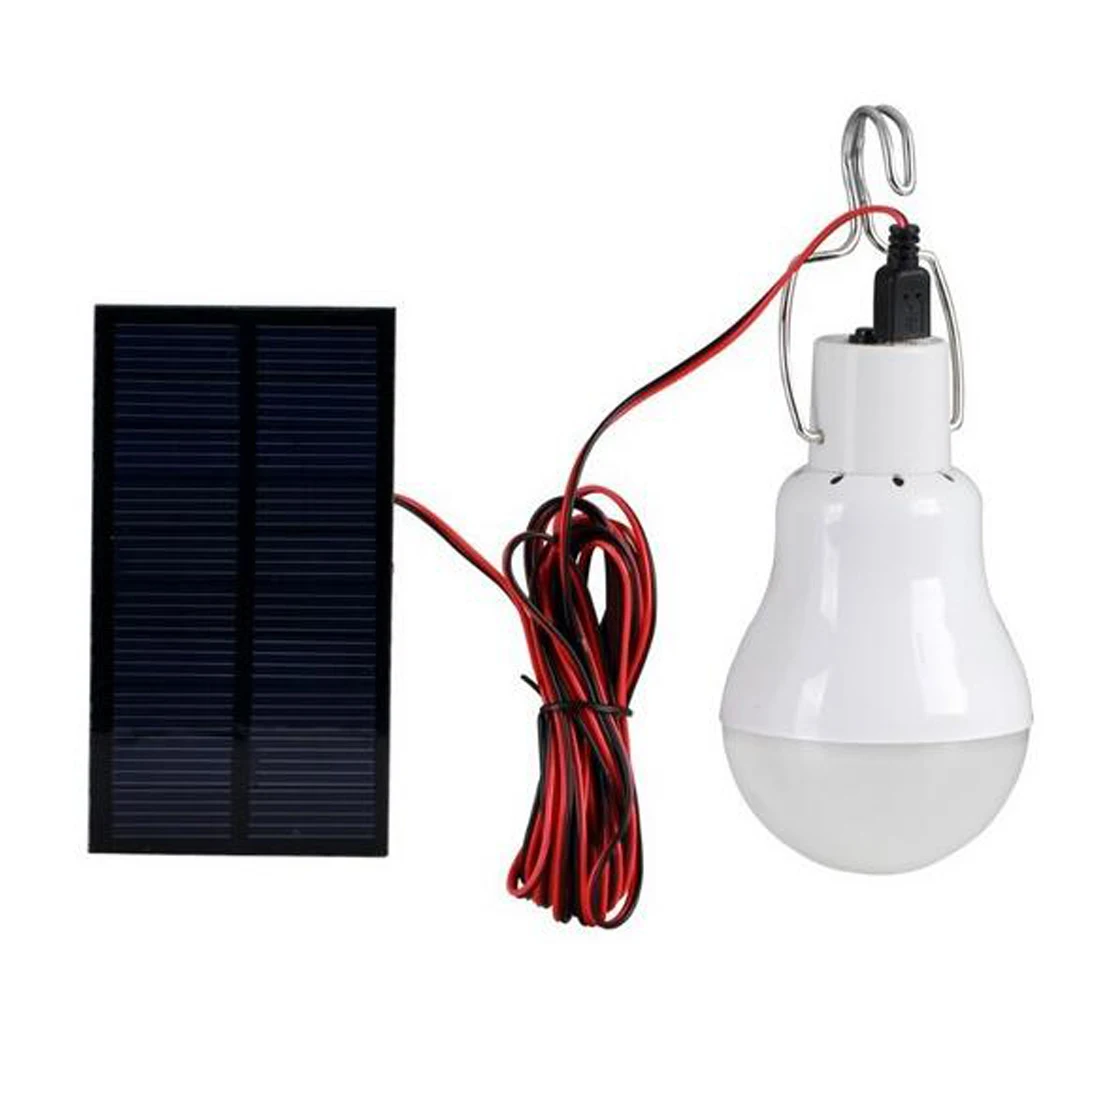 

Hot Portable Solar Powered Bulb Lamp 15W 130LM Led Charged Solar Energy Panel Light For Outdoors Camping Tent Night Light